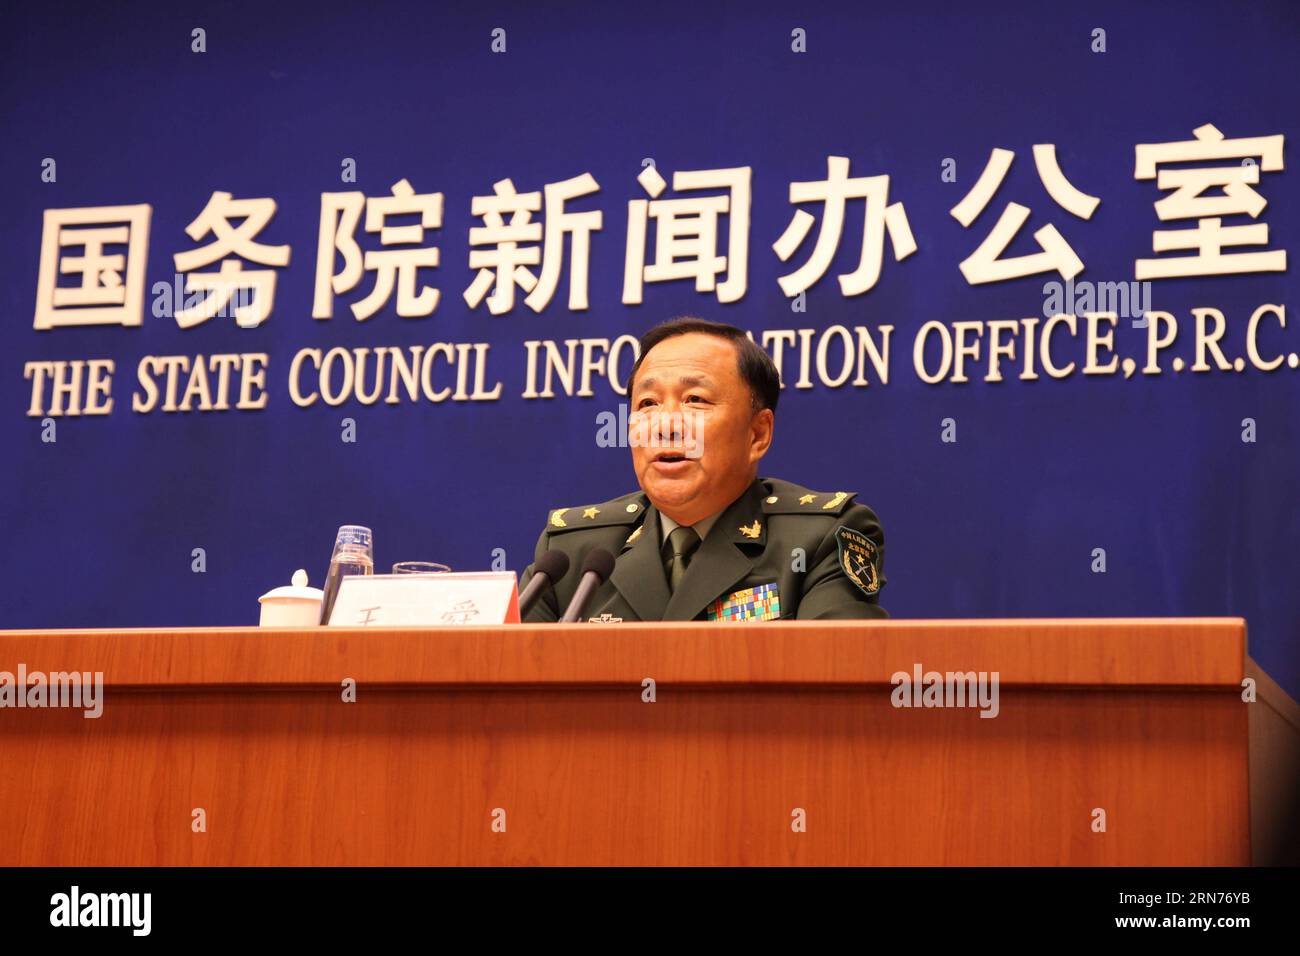 (150821) -- BEIJING, Aug. 21, 2015 -- Major General Wang Shun, who is deputy commander of China s military parade scheduled for Sept. 3 in Beijing to mark the 70th anniversary of China s victory in war against Japan aggression, attends a press conference in Beijing, capital of China, Aug. 21, 2015. About 84 percent of armaments to be displayed in the Sept. 3 military parade have never been viewed by the public, said a senior military officer on Friday. )(mcg) CHINA-BEIJING-V-DAY PARADE-PRESS CONFERENCE (CN) WangxHaobo PUBLICATIONxNOTxINxCHN   150821 Beijing Aug 21 2015 Major General Wang Shun Stock Photo